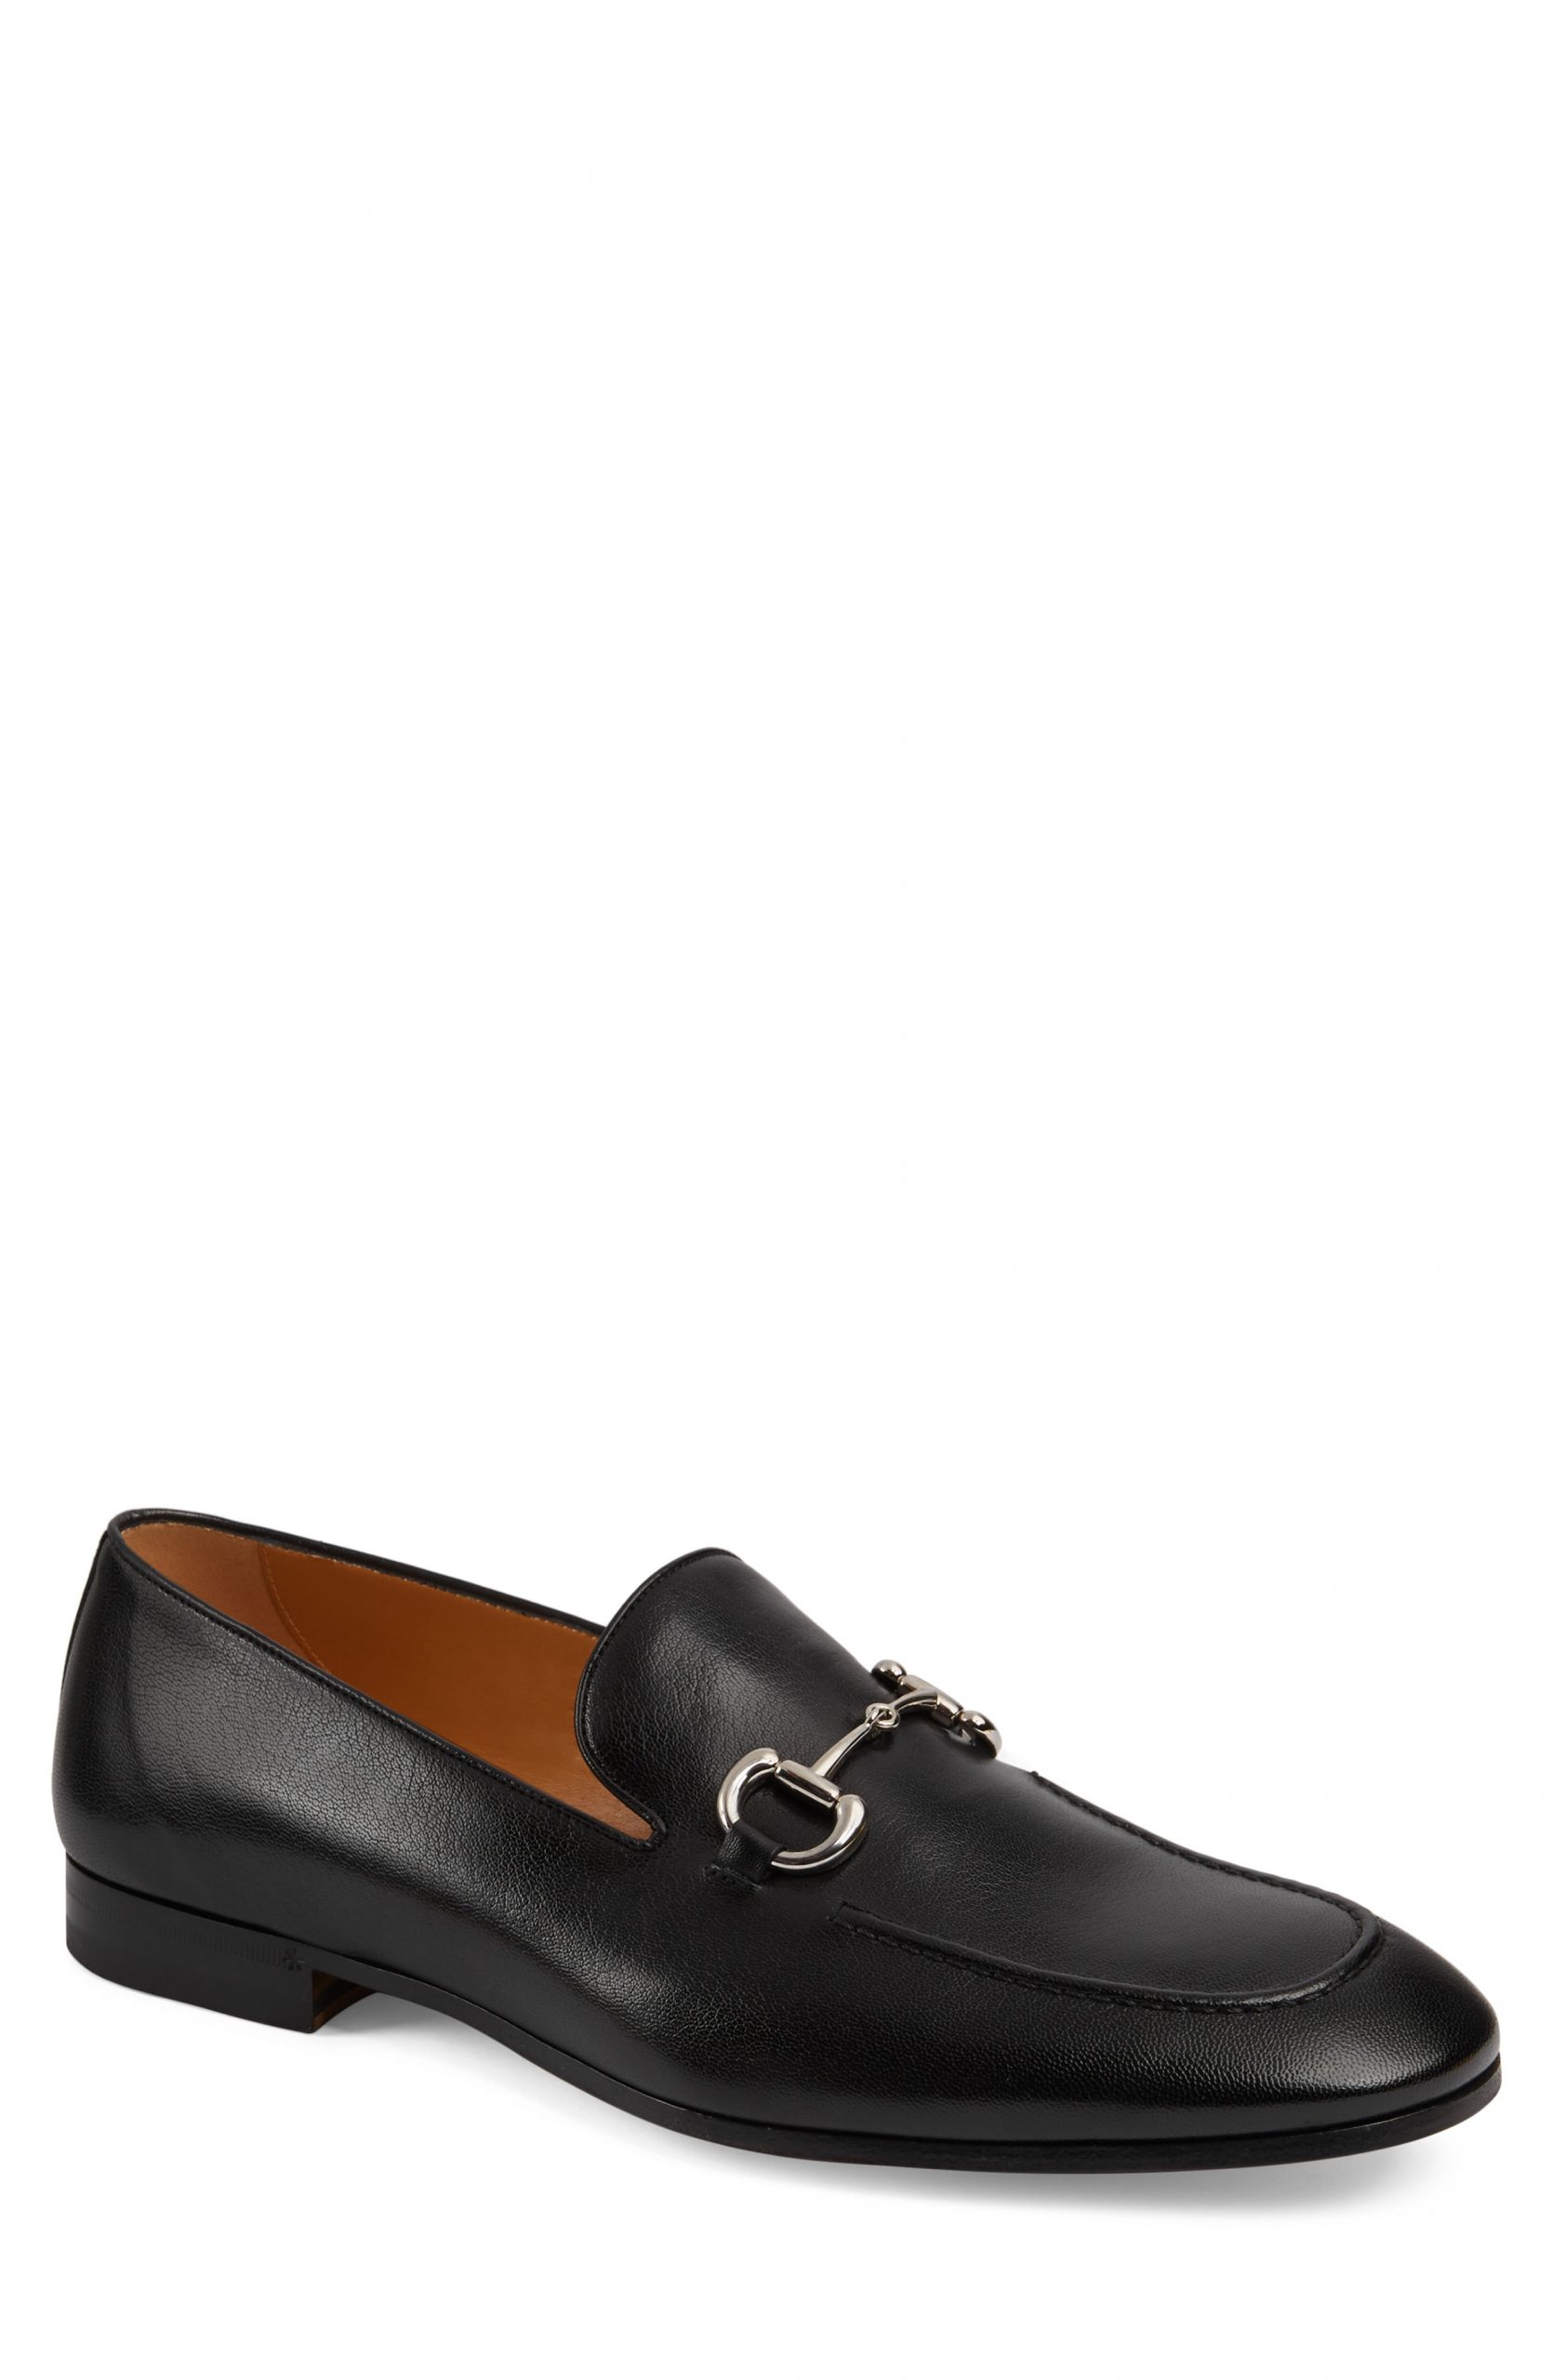 gucci donnie loafer brown